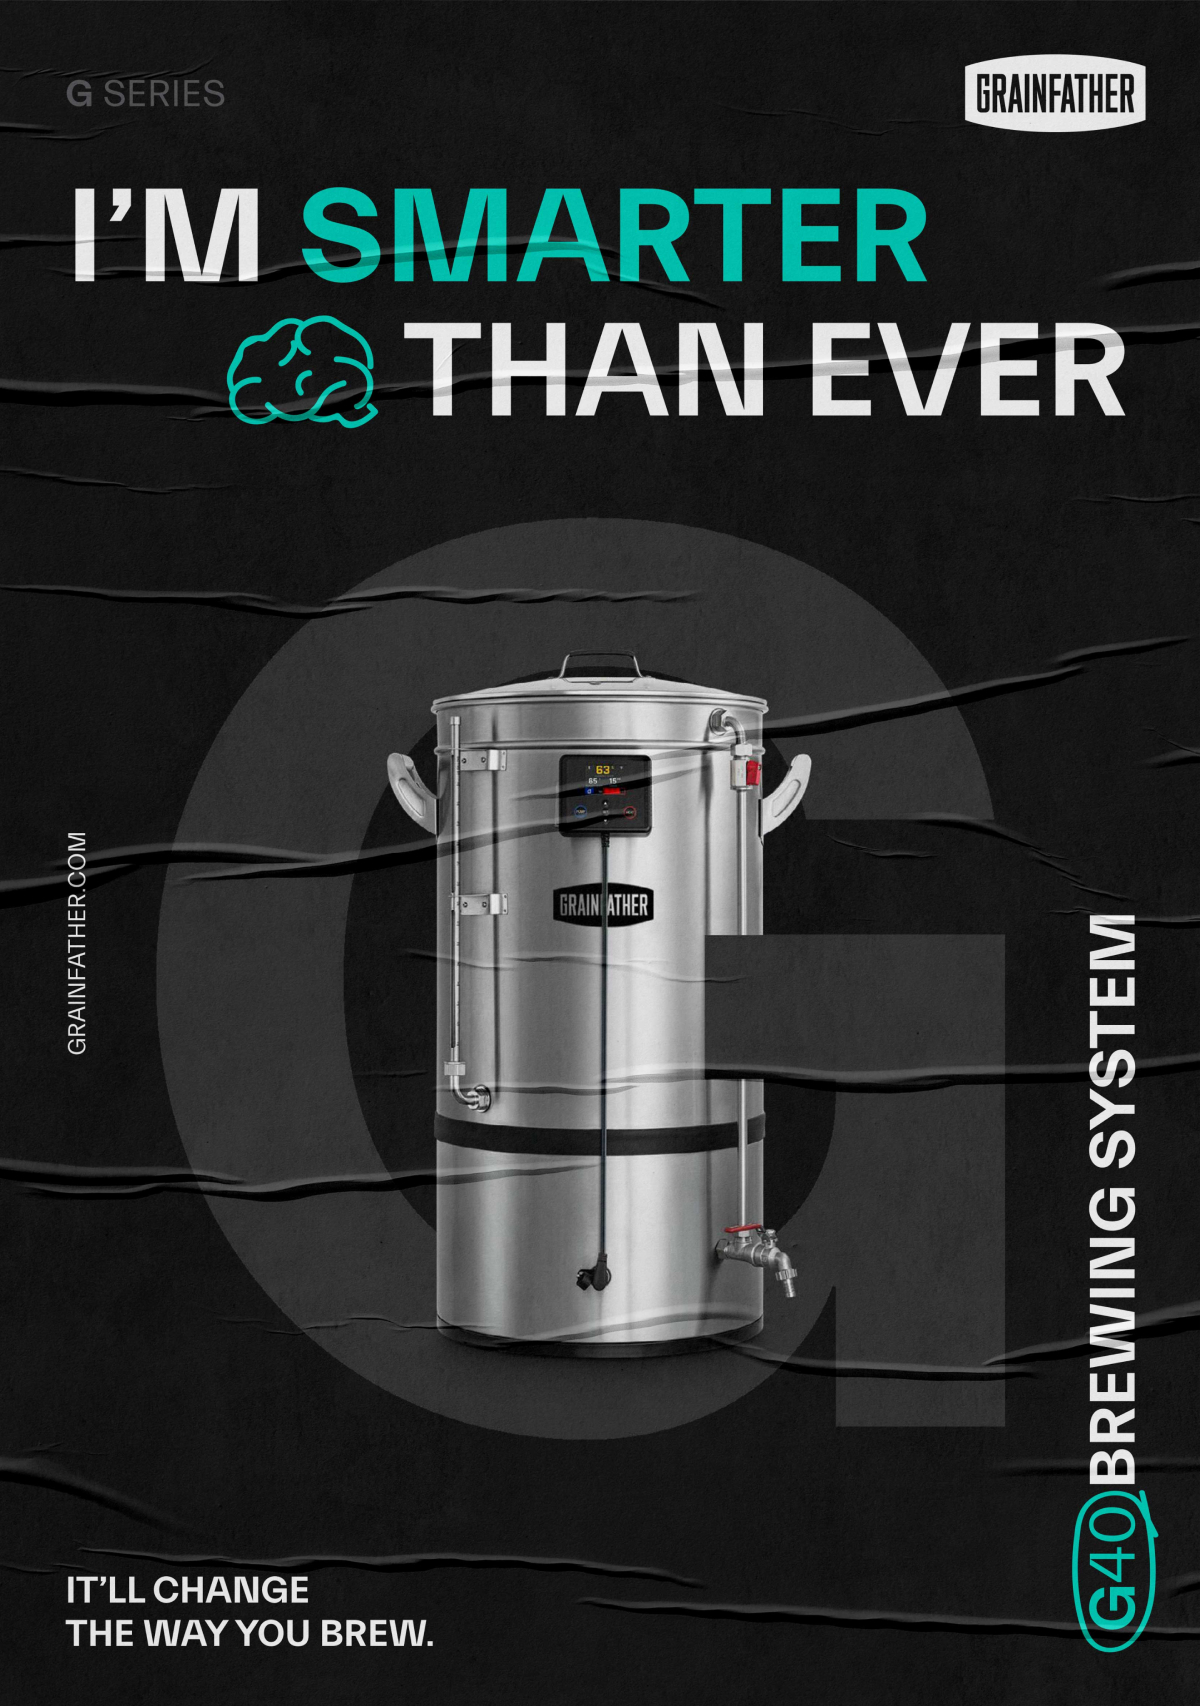 grainfather poster saying i'm smarter than ever